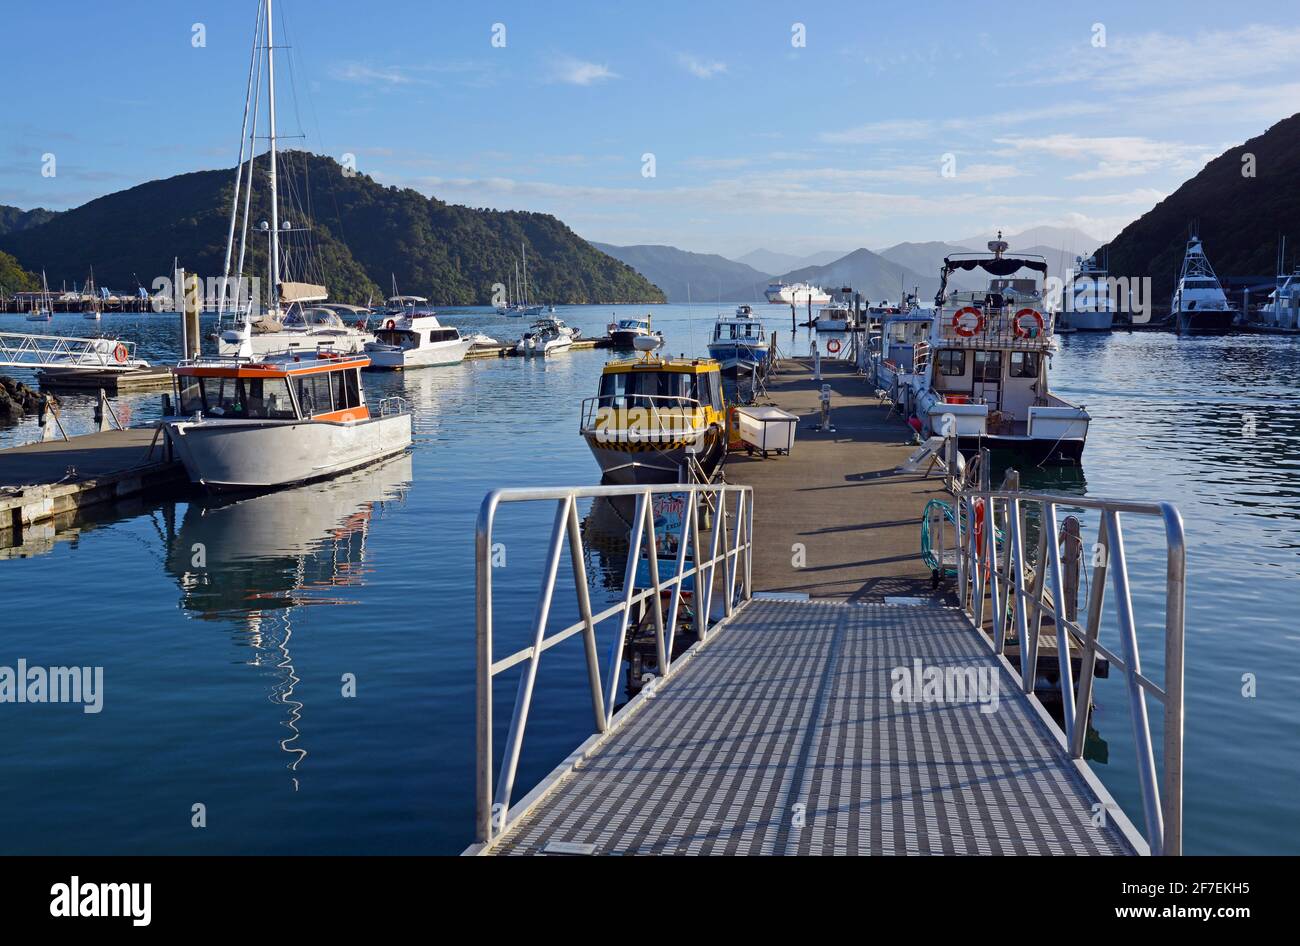 Charter Fishing Boats and Water Taxis, early morning, Picton, New Zealand in Autumn Stock Photo